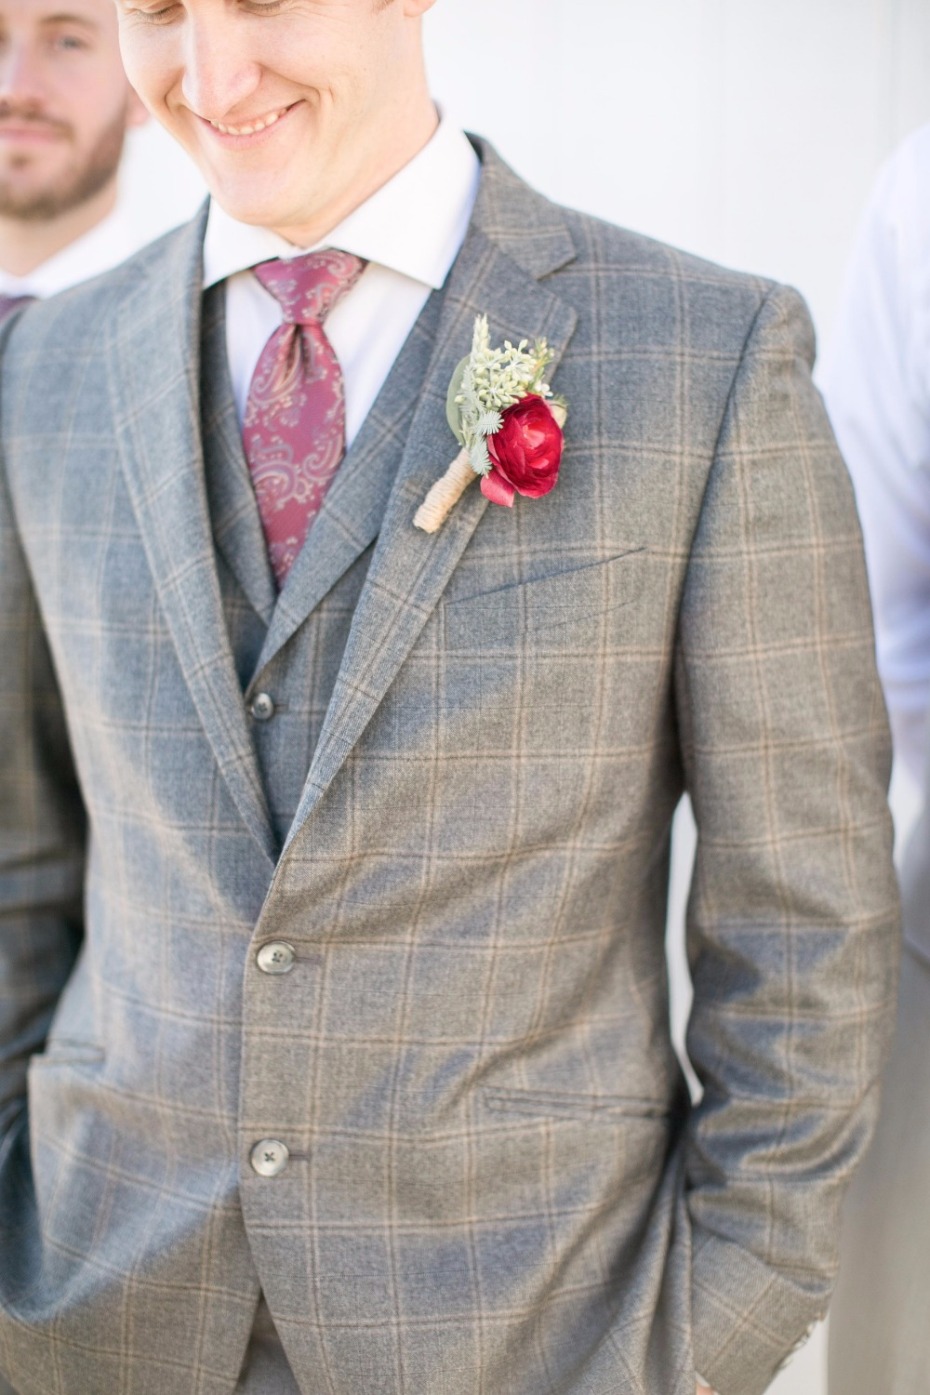 Fall inspired looks for the groom